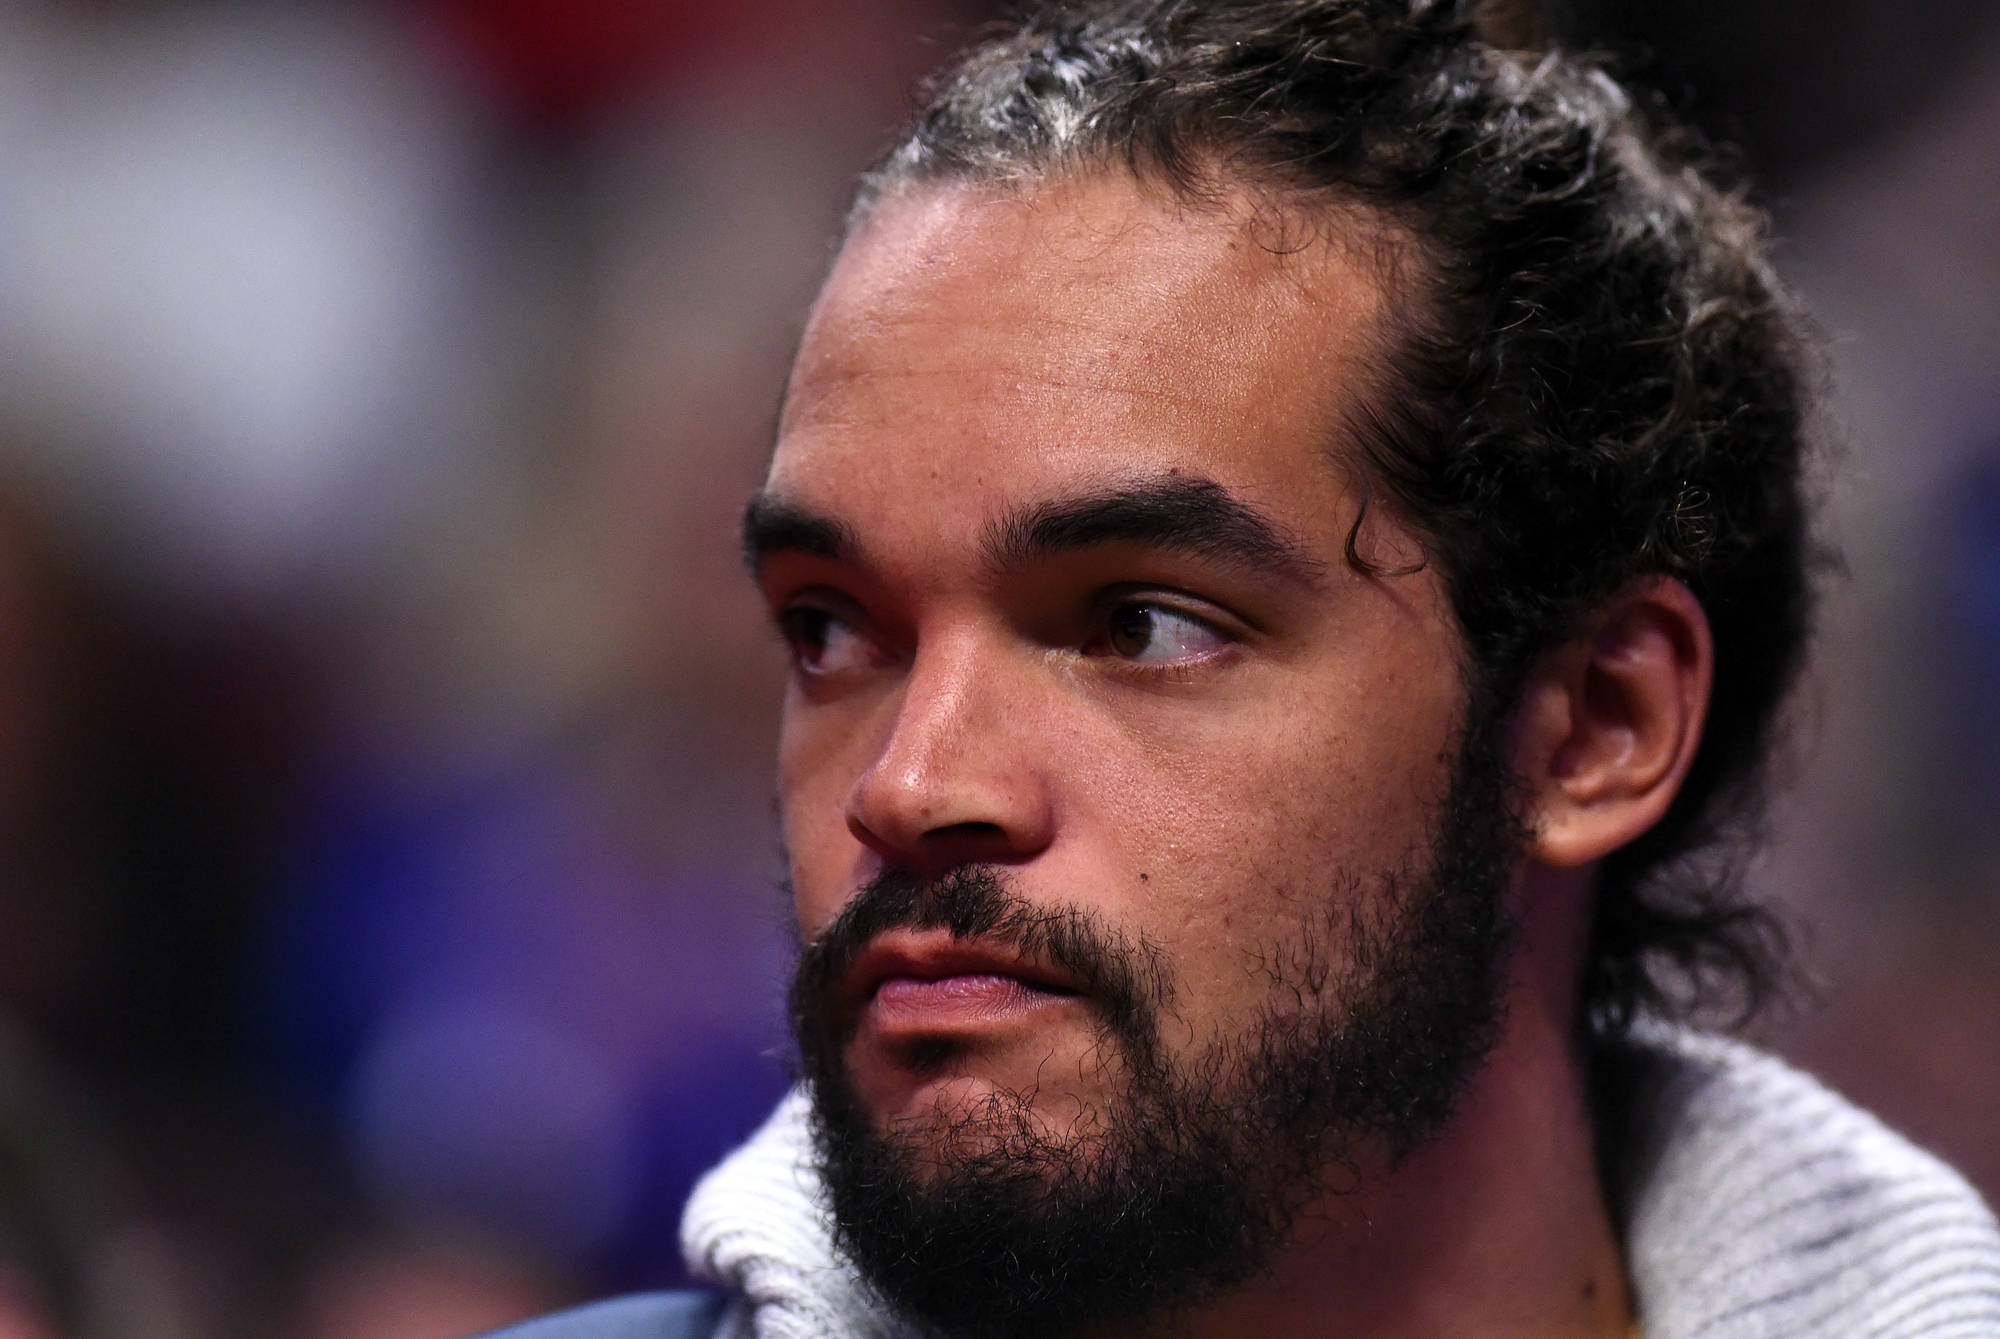 NBA: Noah missed team dinner due to a difference in beliefs